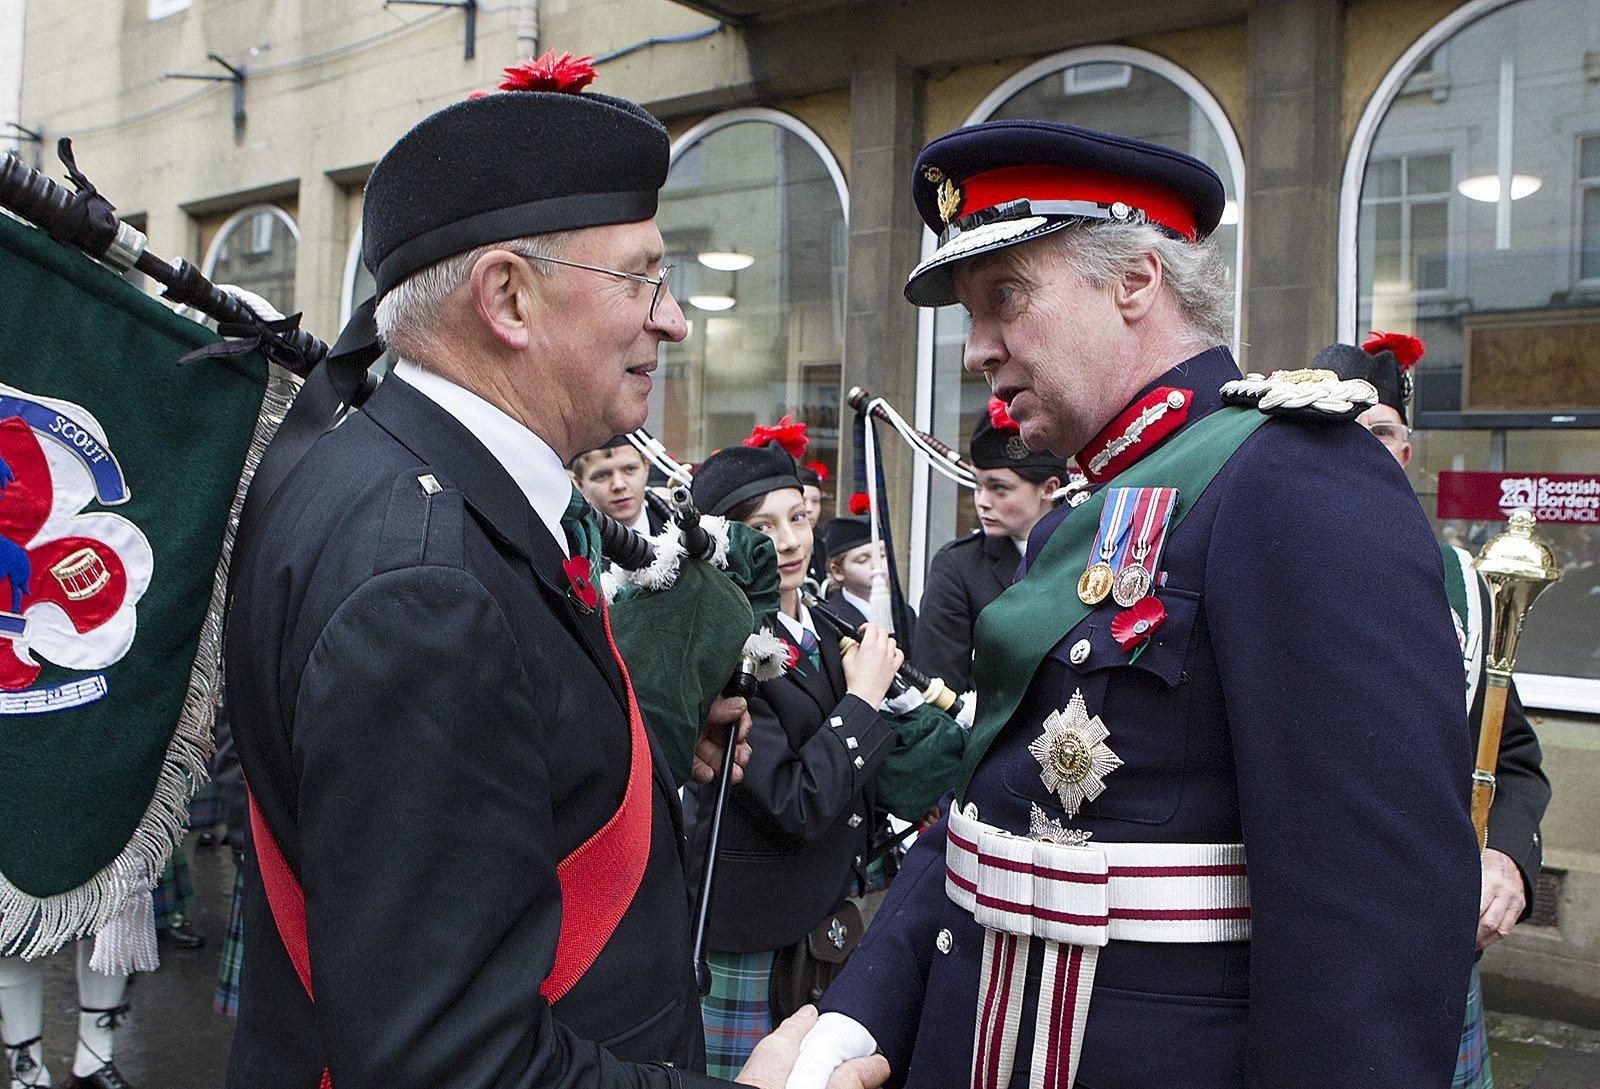 Hawick Scouts Pipe Band pipe major Michael Bruce meets the Duke of Buccleuch.